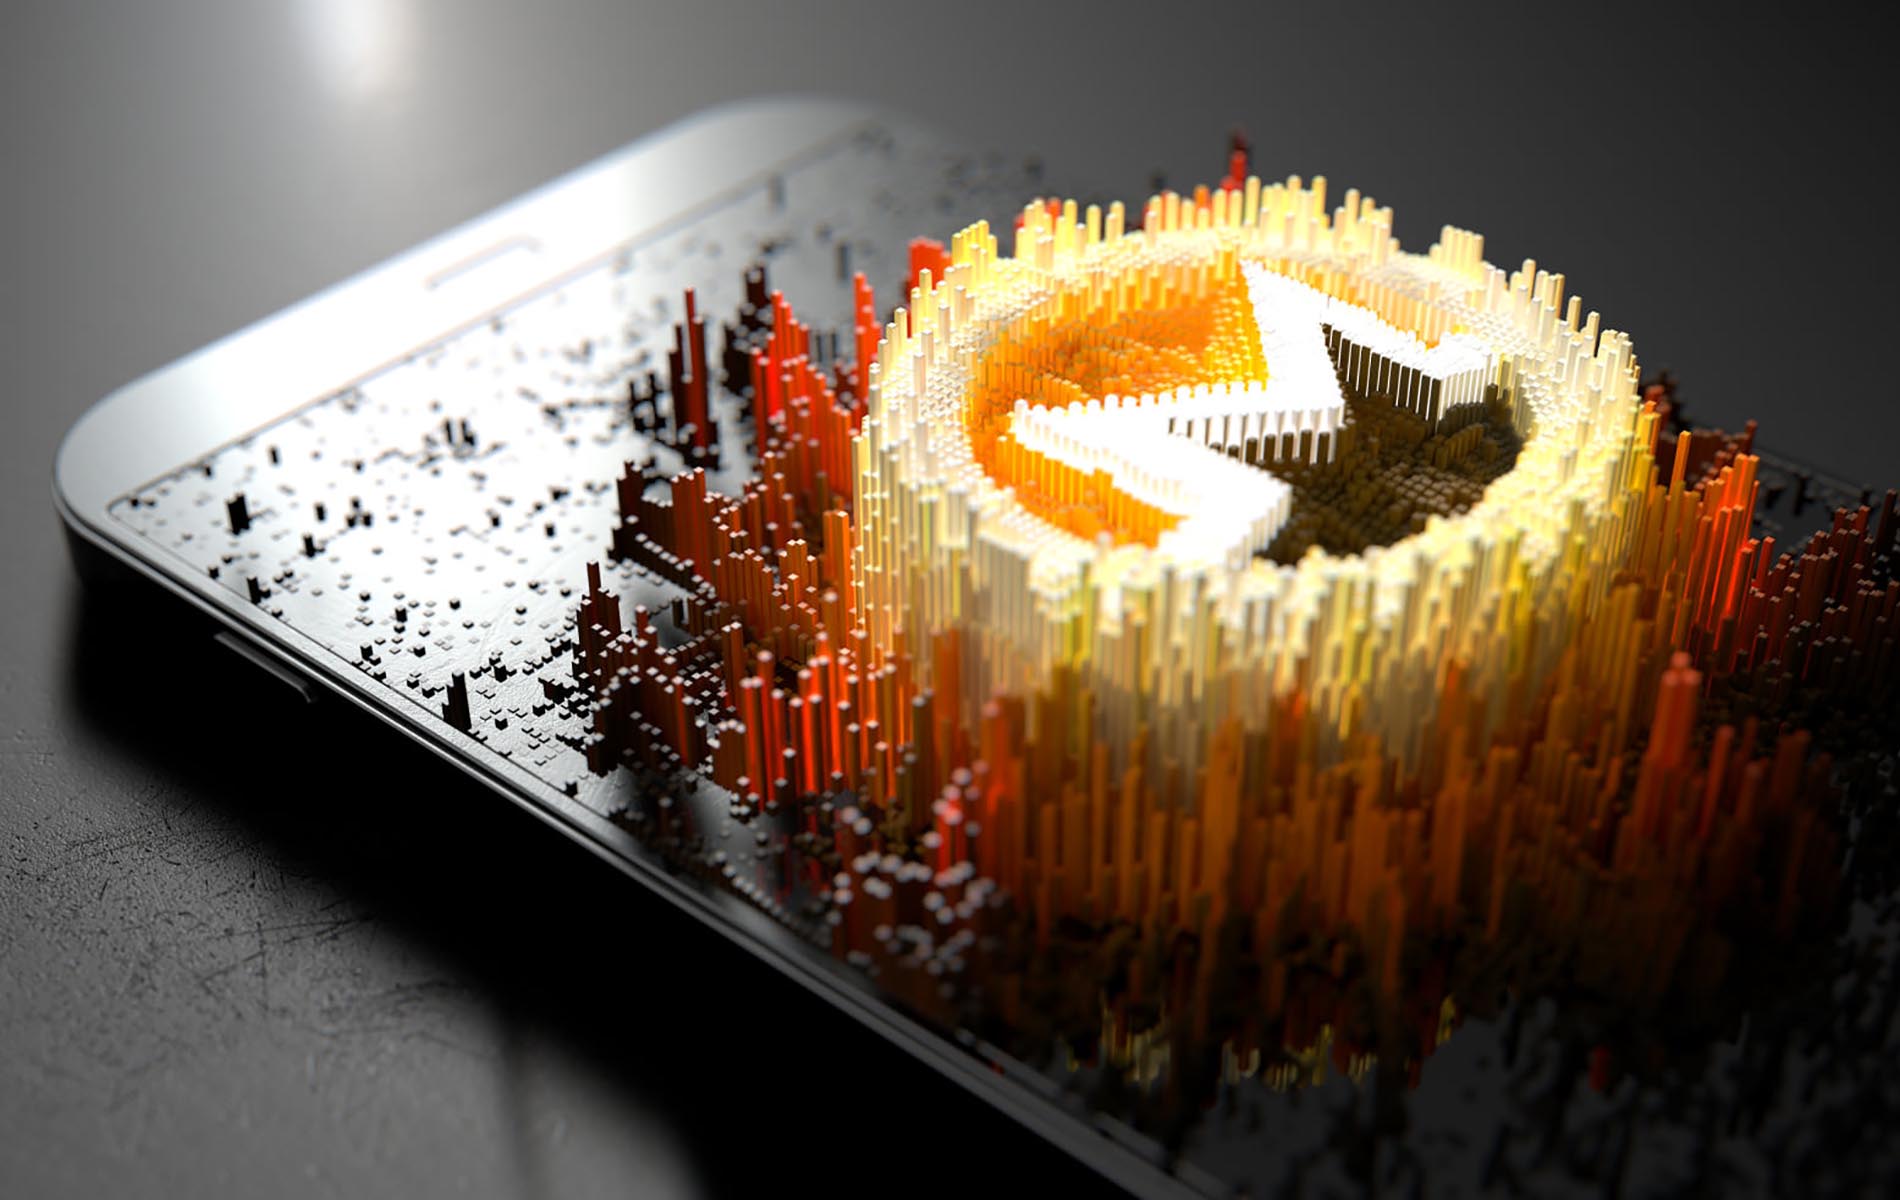 Monero-mining app removed from Mac store